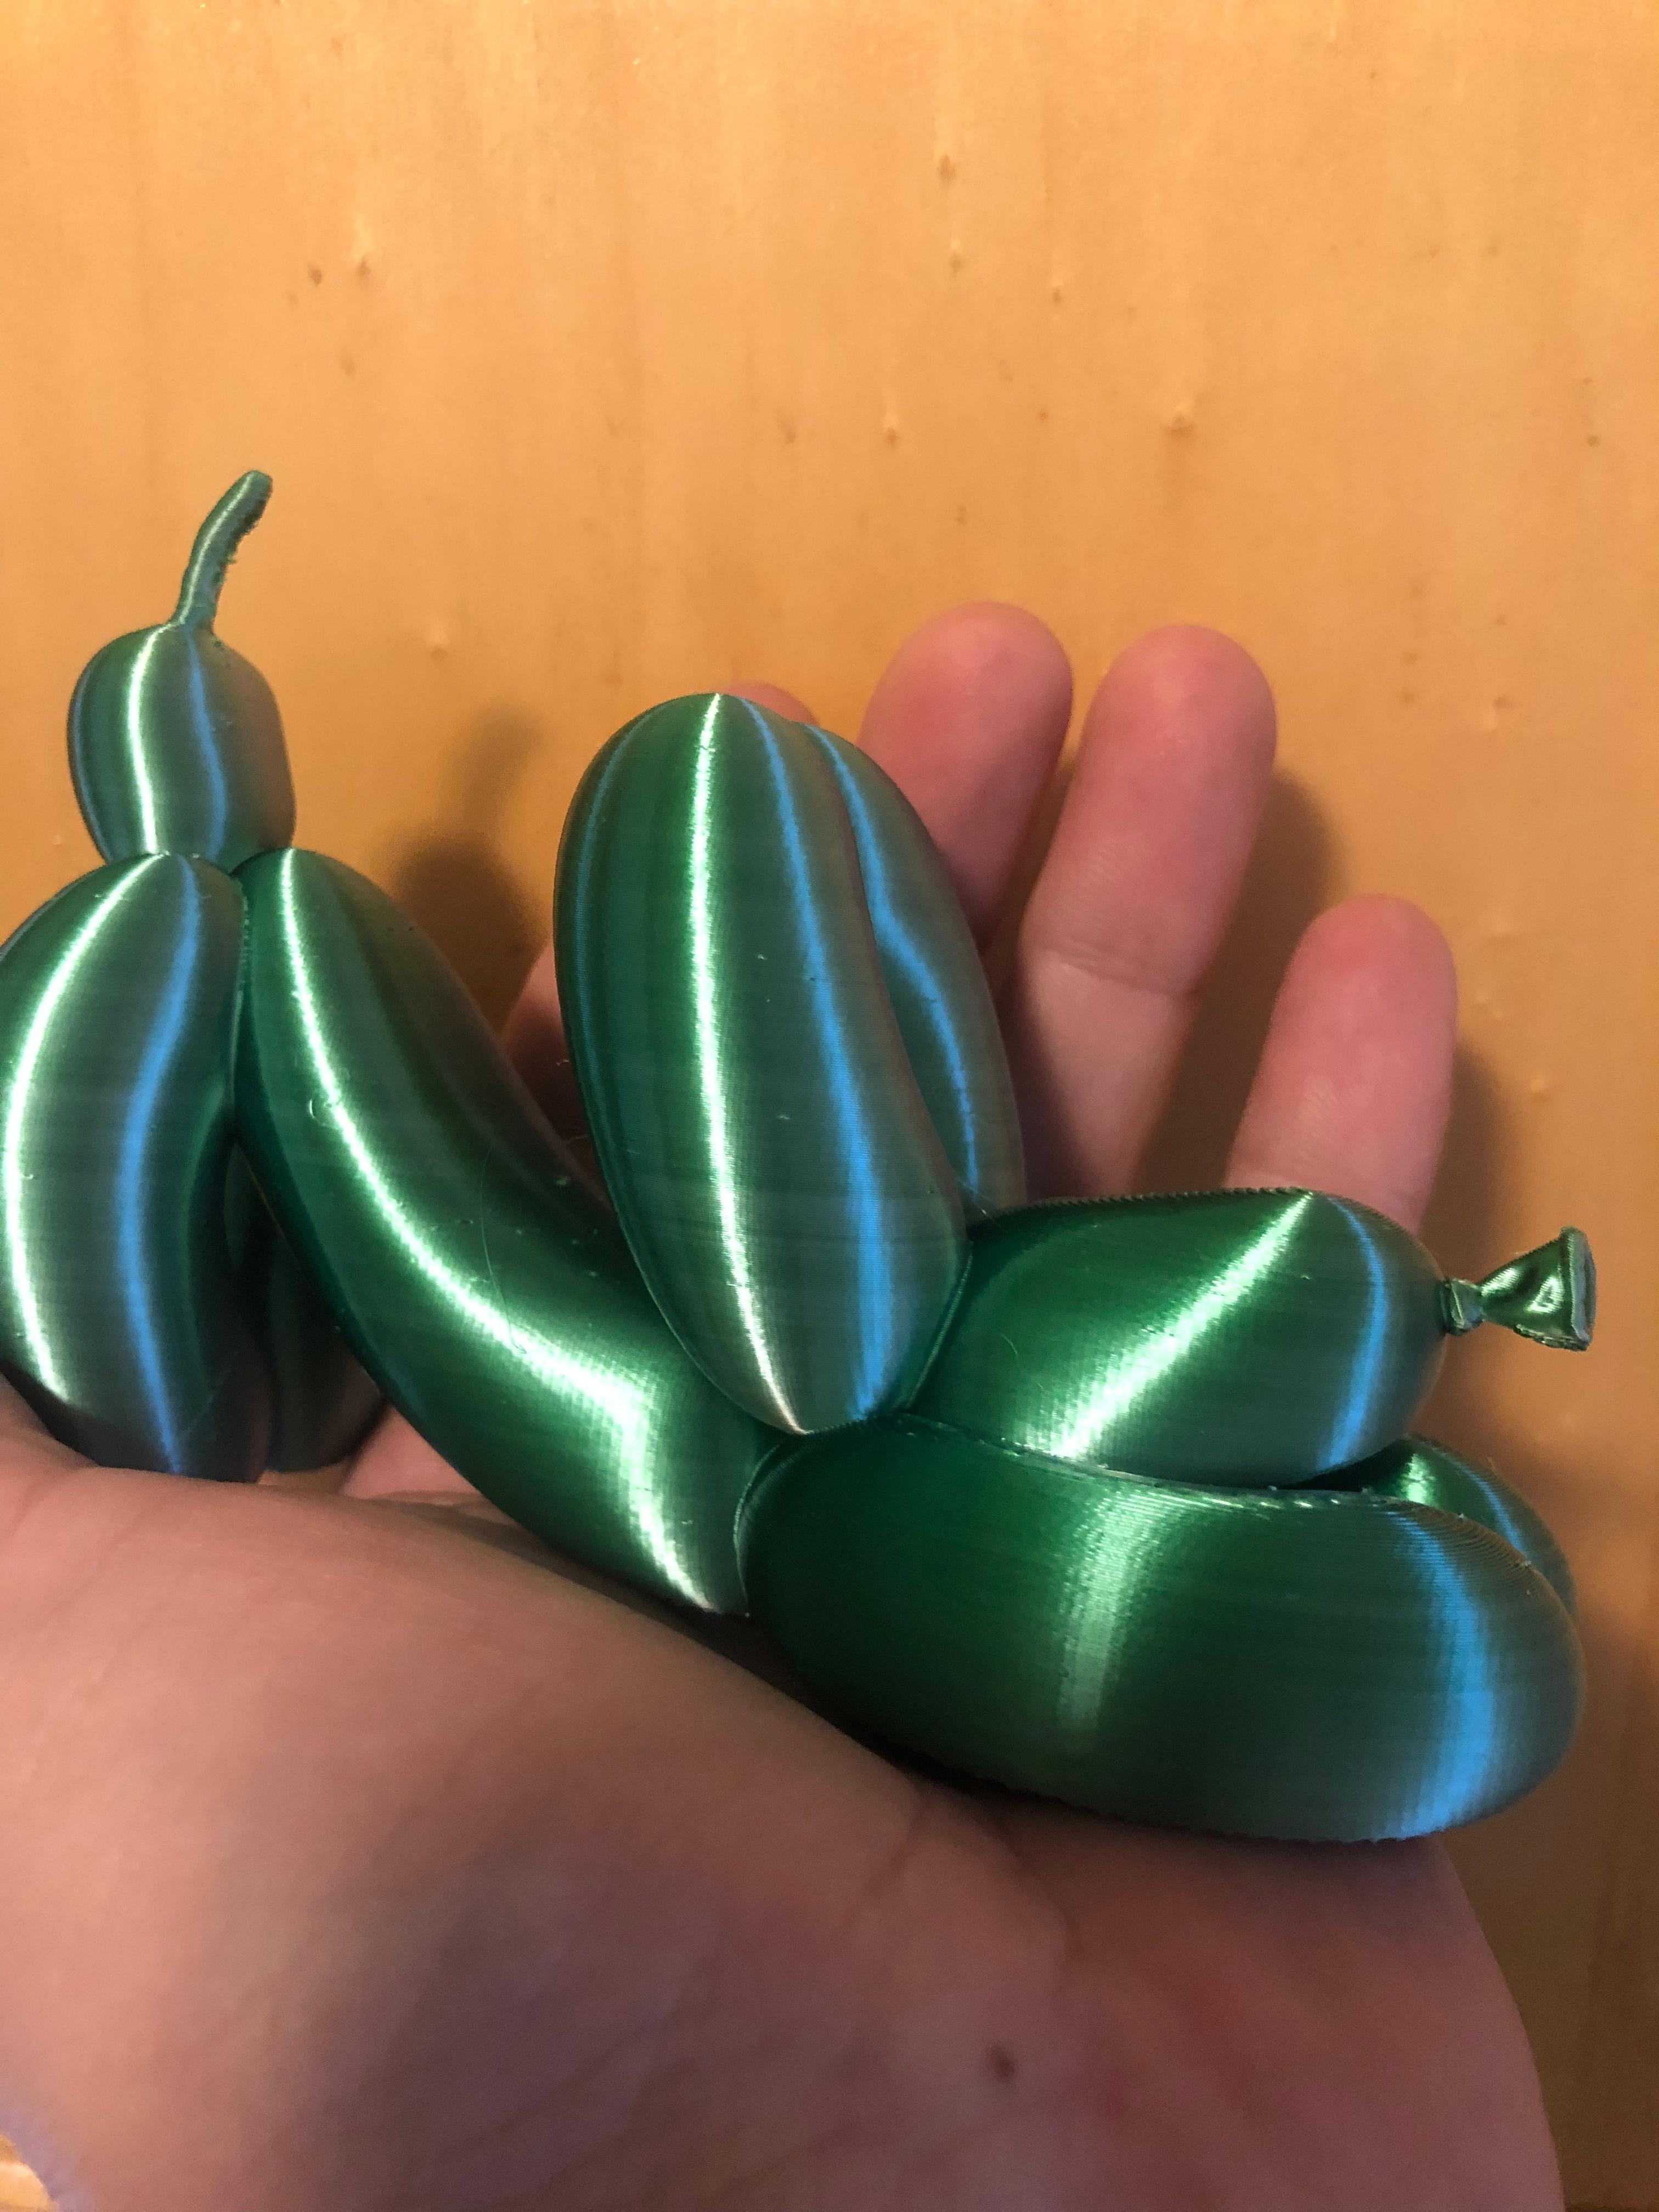 Balloon Doggy Yoga  - Printed with matterhackers quantum white green  - 3d model